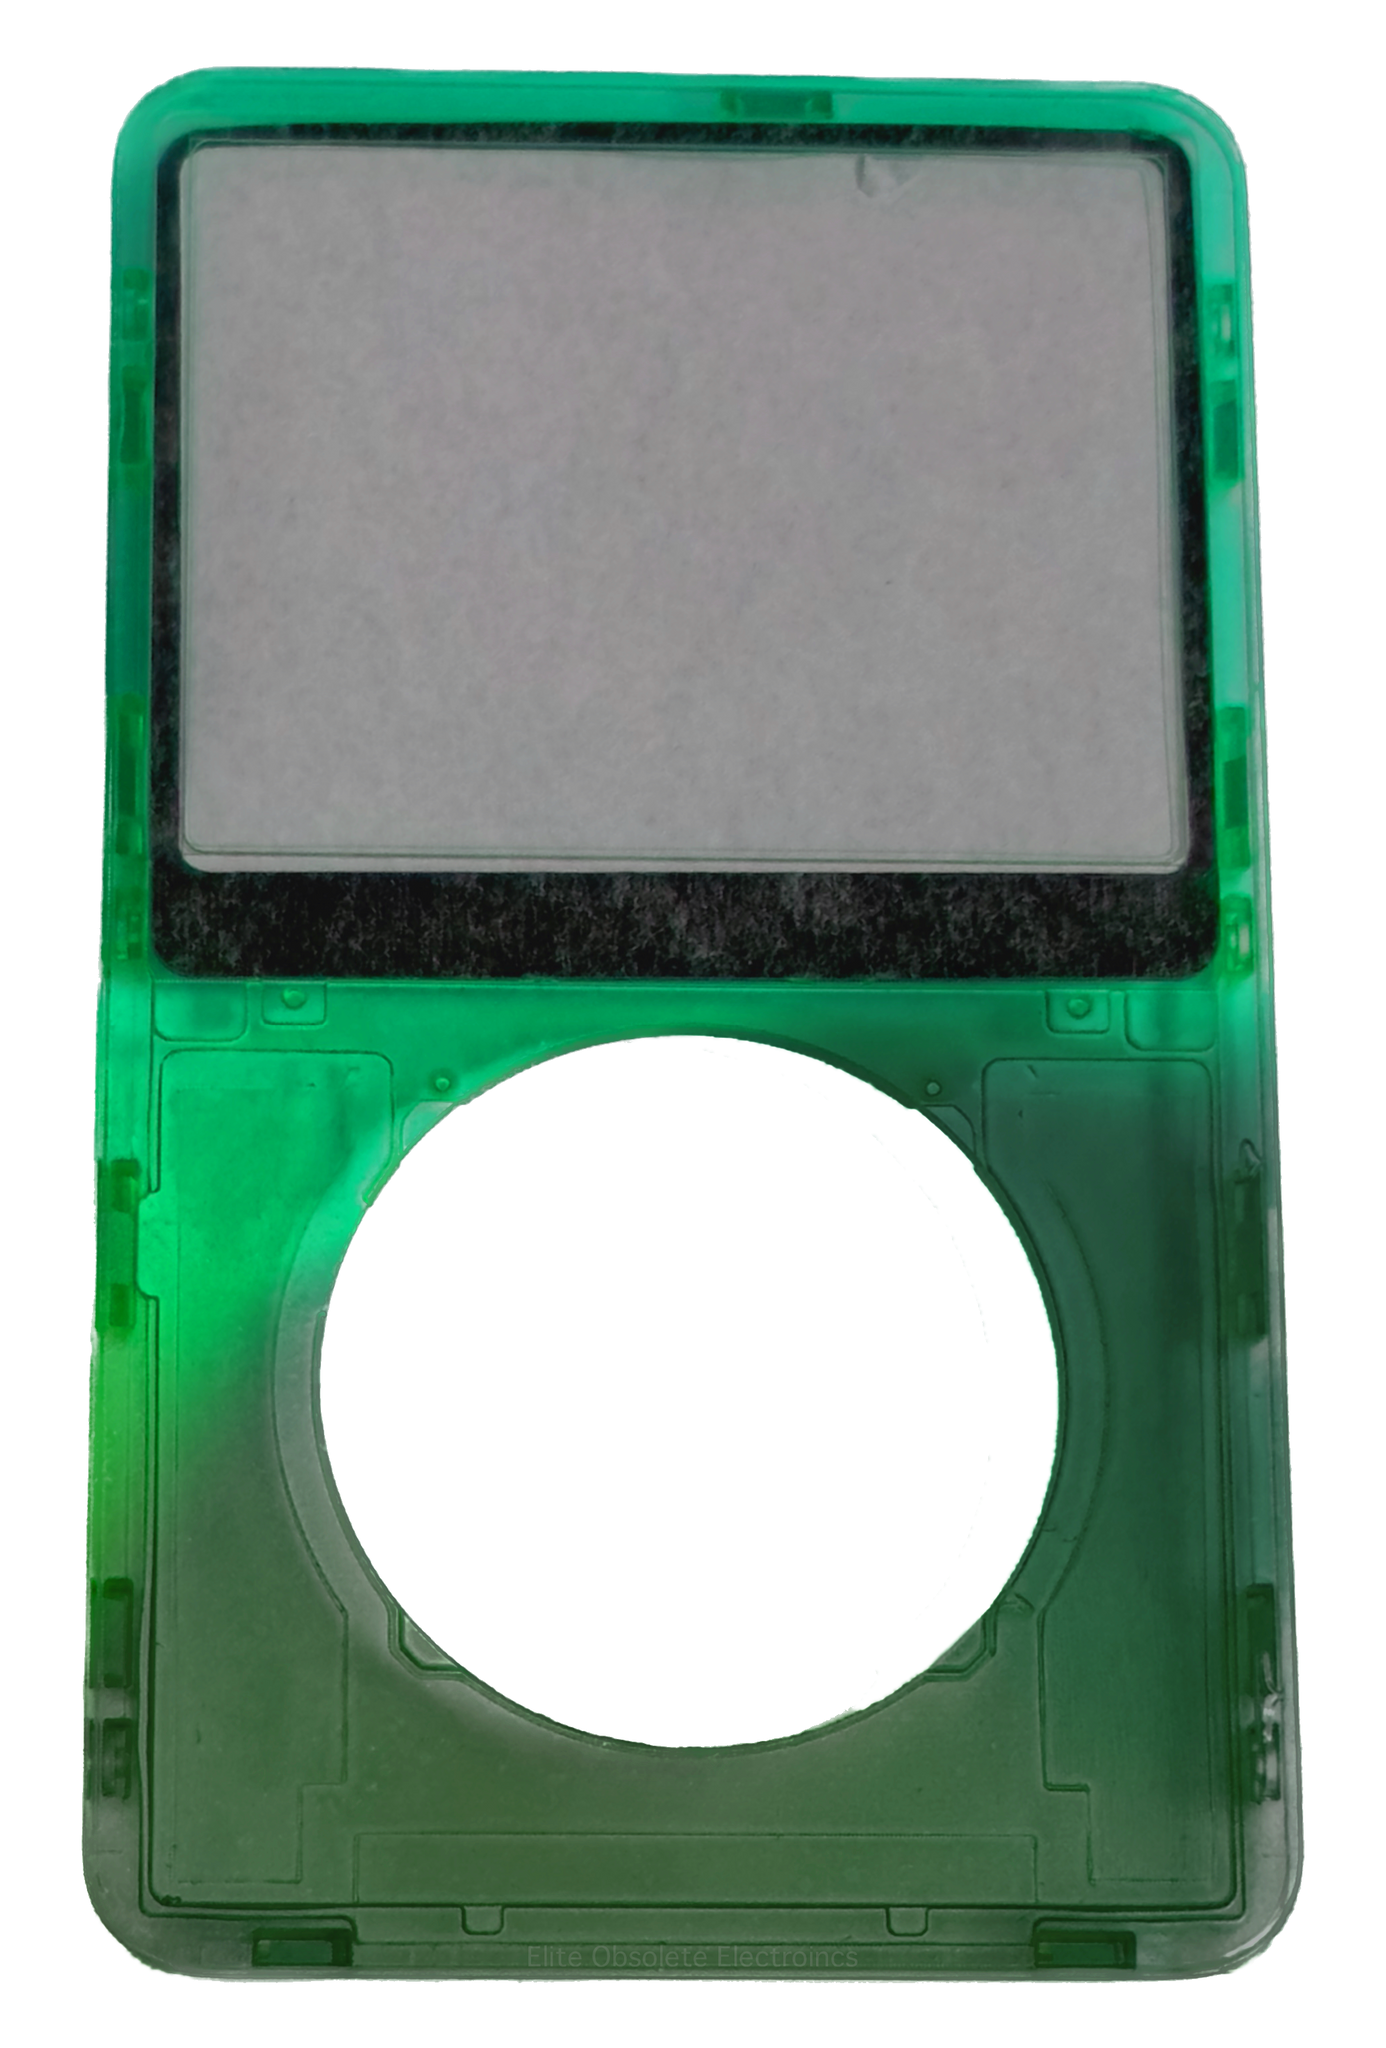 Atomic Neon Clover Green Smoke Transparent Clear Faceplate For Apple iPod Video 5th & 5.5 Generation Plastic